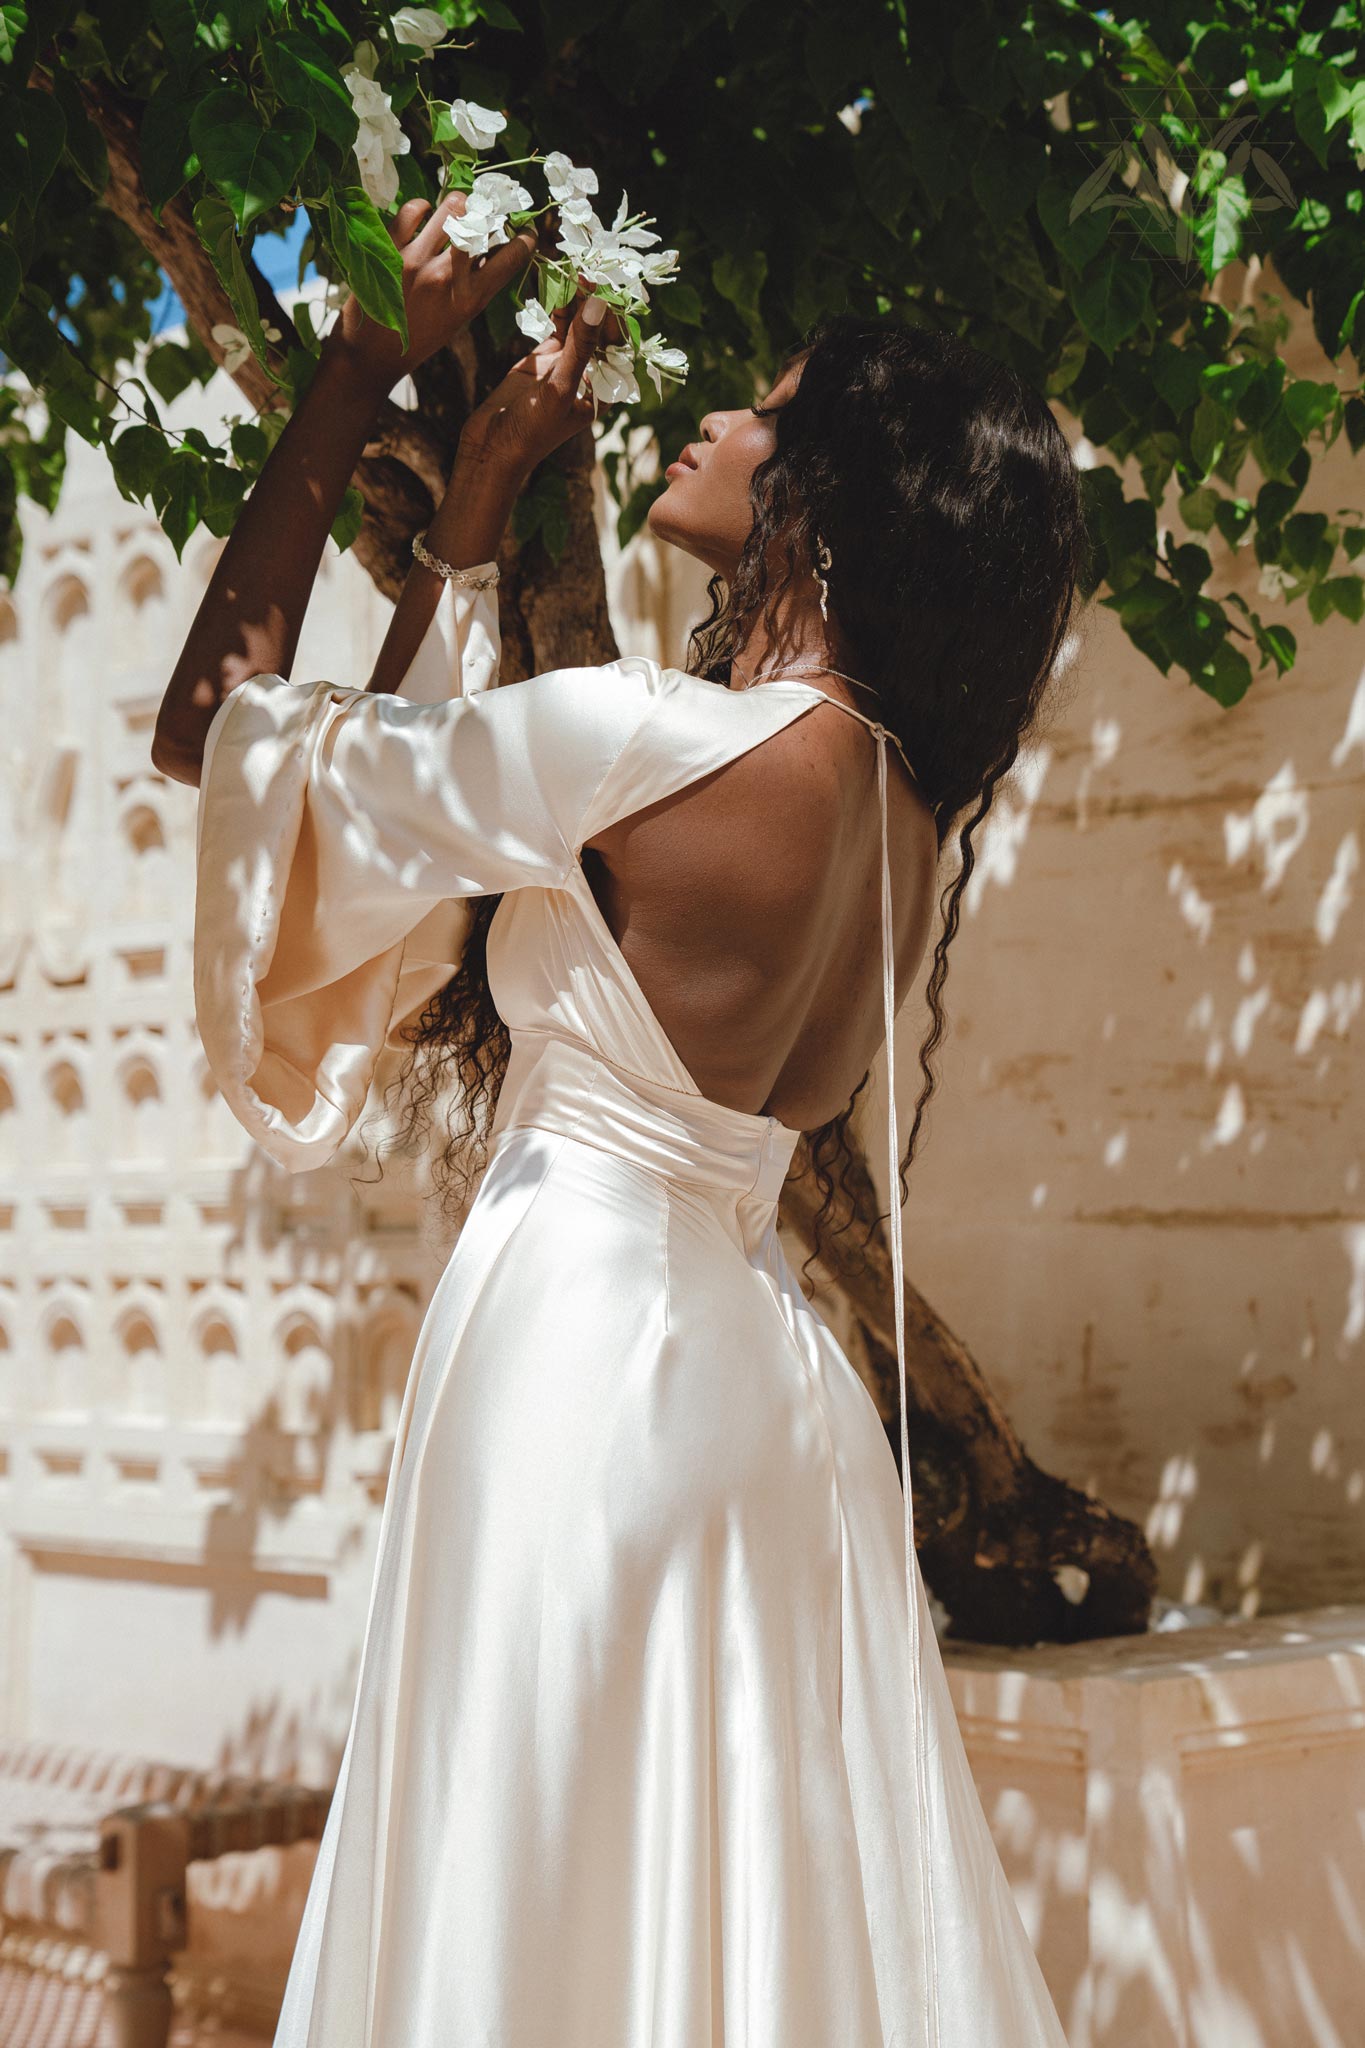 Radiate elegance in this exquisite off-white peace silk maxi dress, boasting a bohemian flair with its enchanting bell sleeves and eye-catching open back.